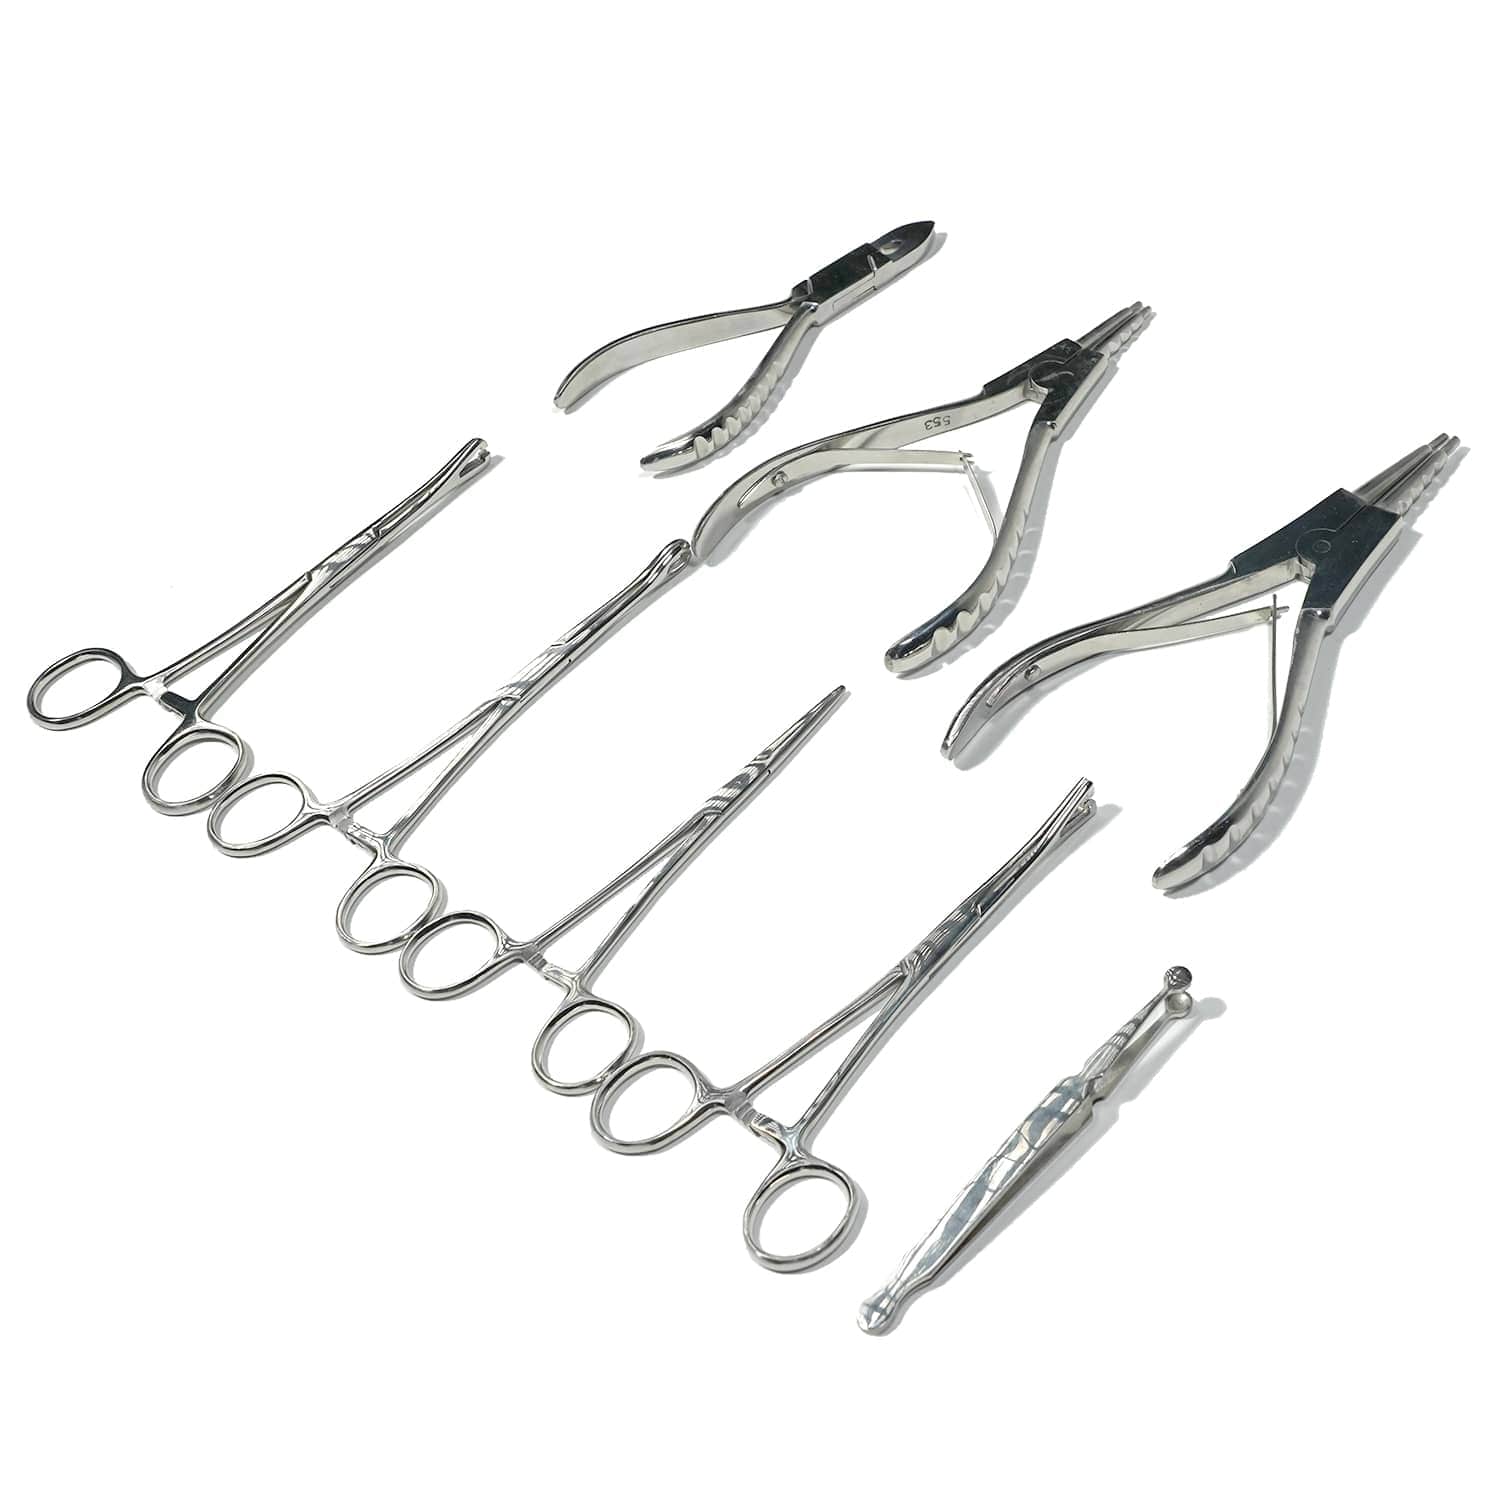 1pc Locking Tweezers Pliers Surgical Steel Tattoo Piercing Forceps Clamp  Tools Nostril Septum Tragus Belly Tongue Lip Piercings | Fruugo BH